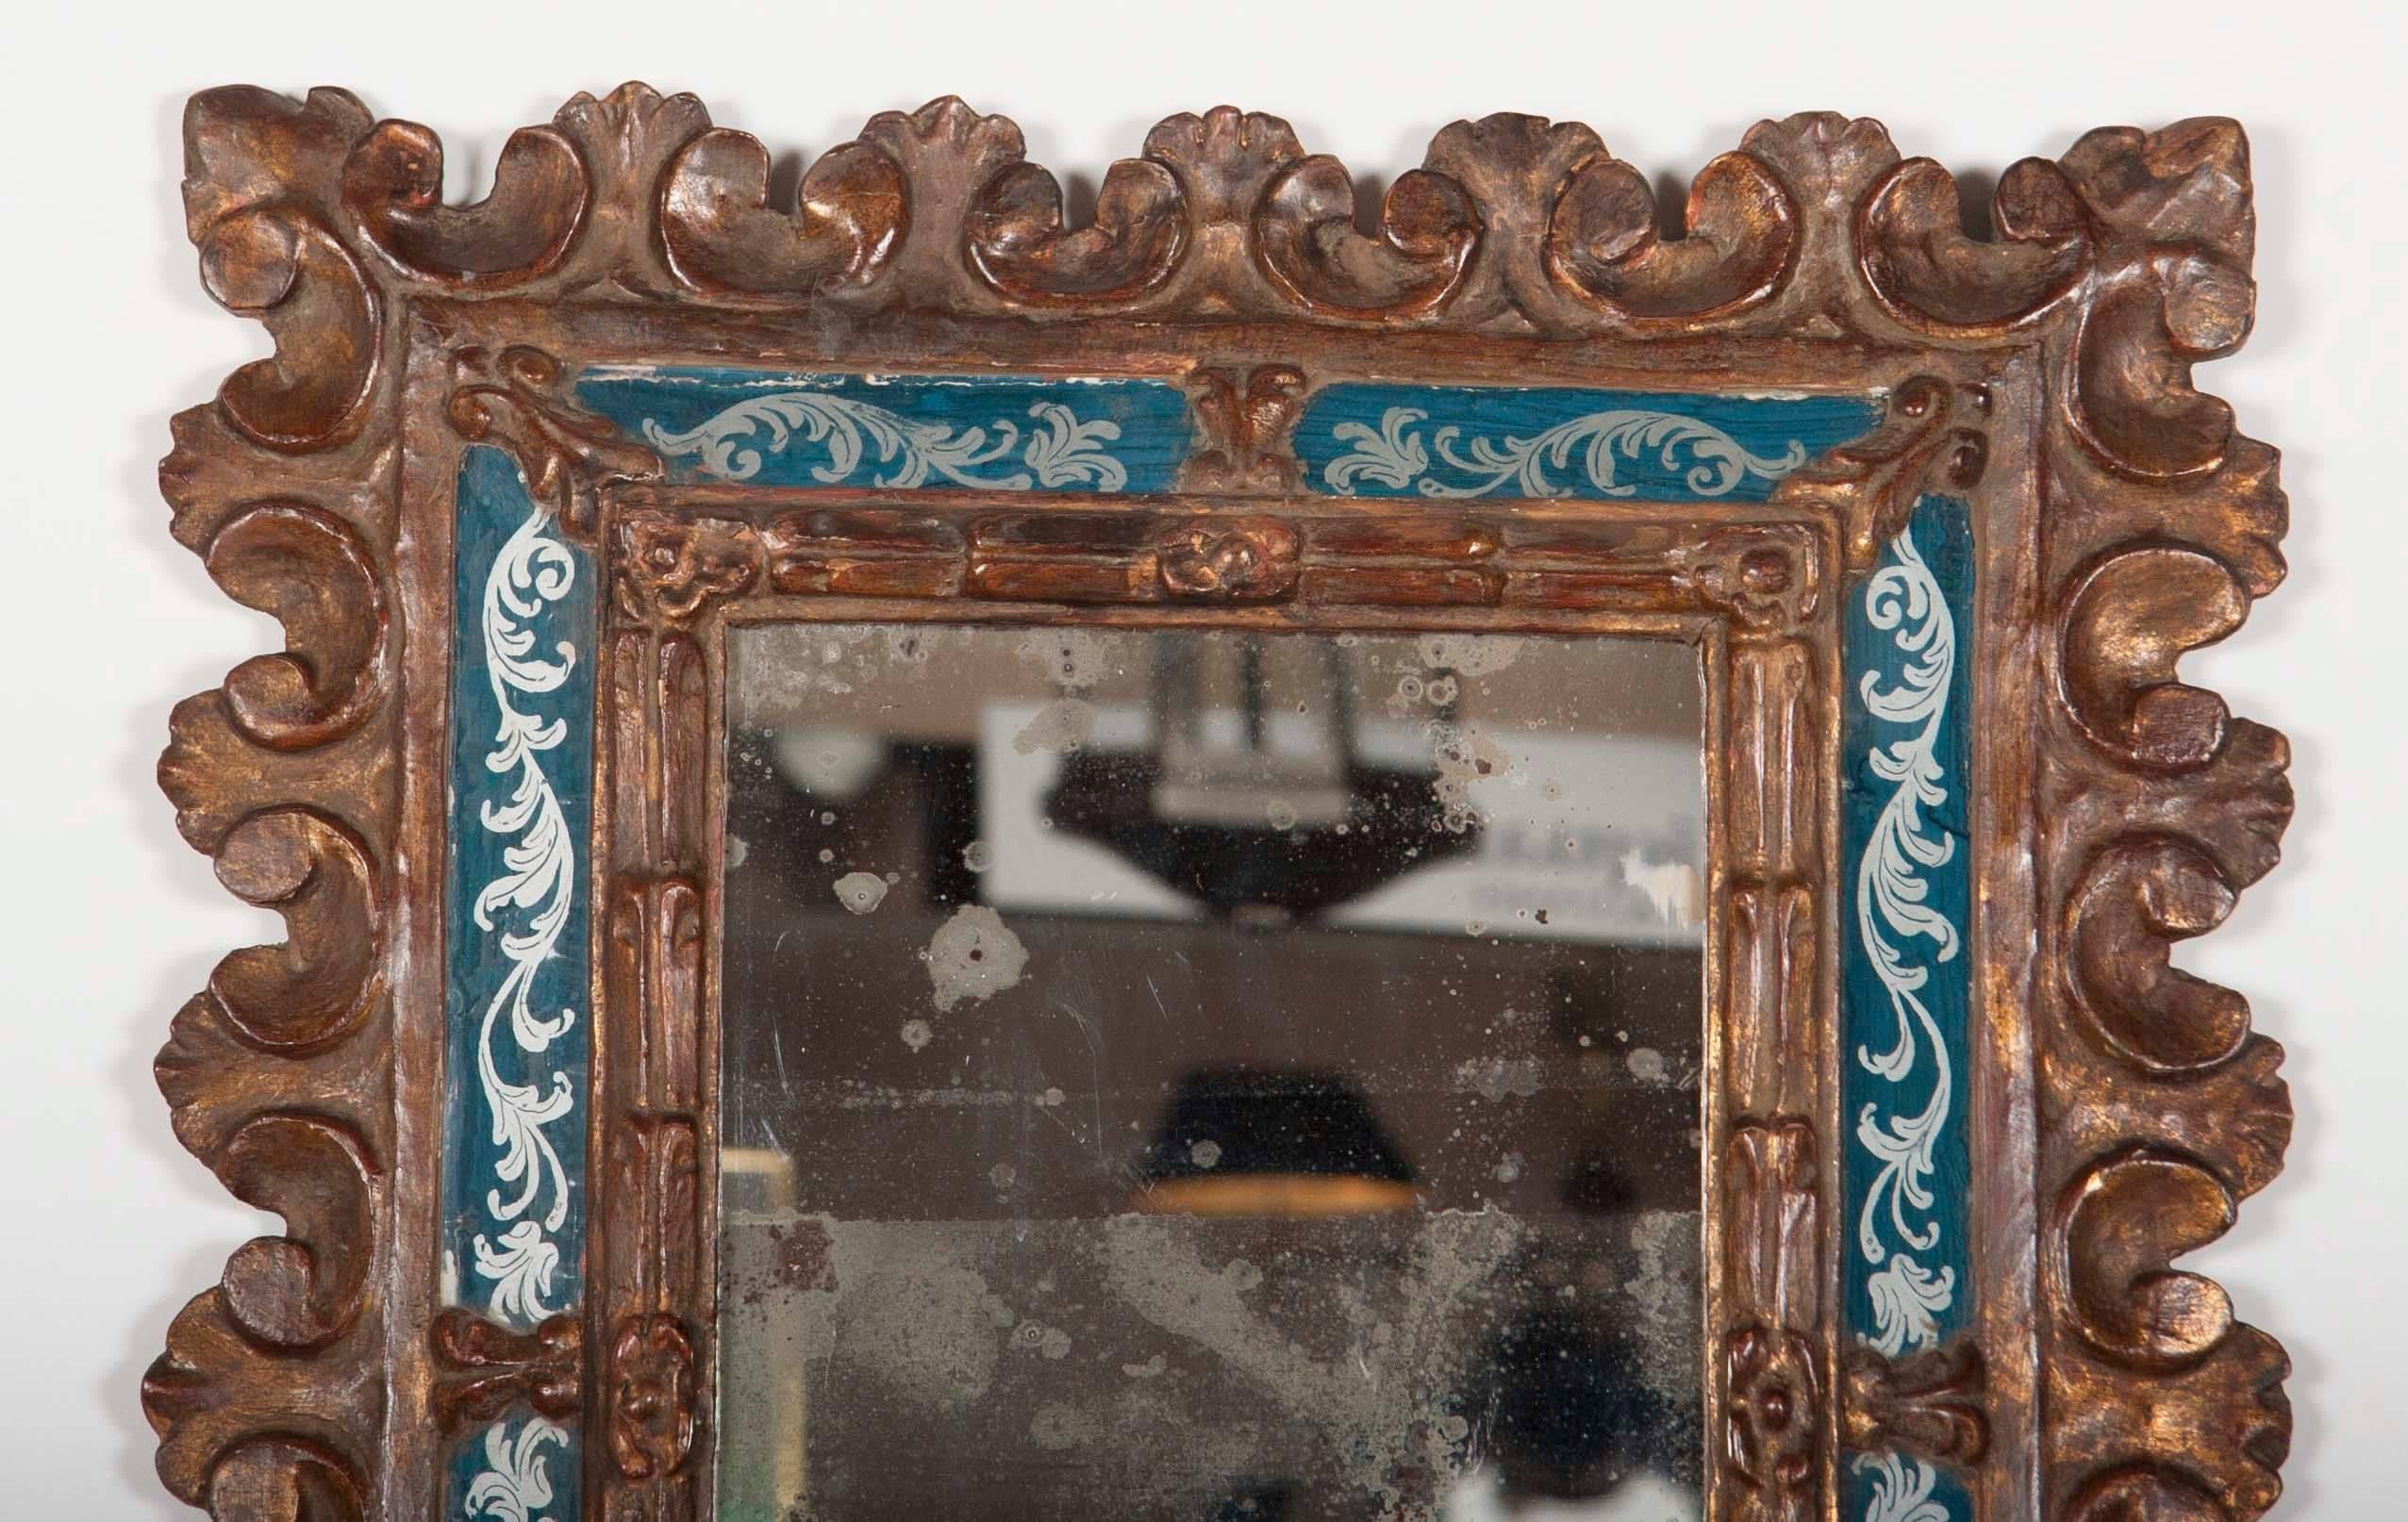 A Venetian carved gilt wood frame with silver and blue vere églomisé panels and original antique looking glass.